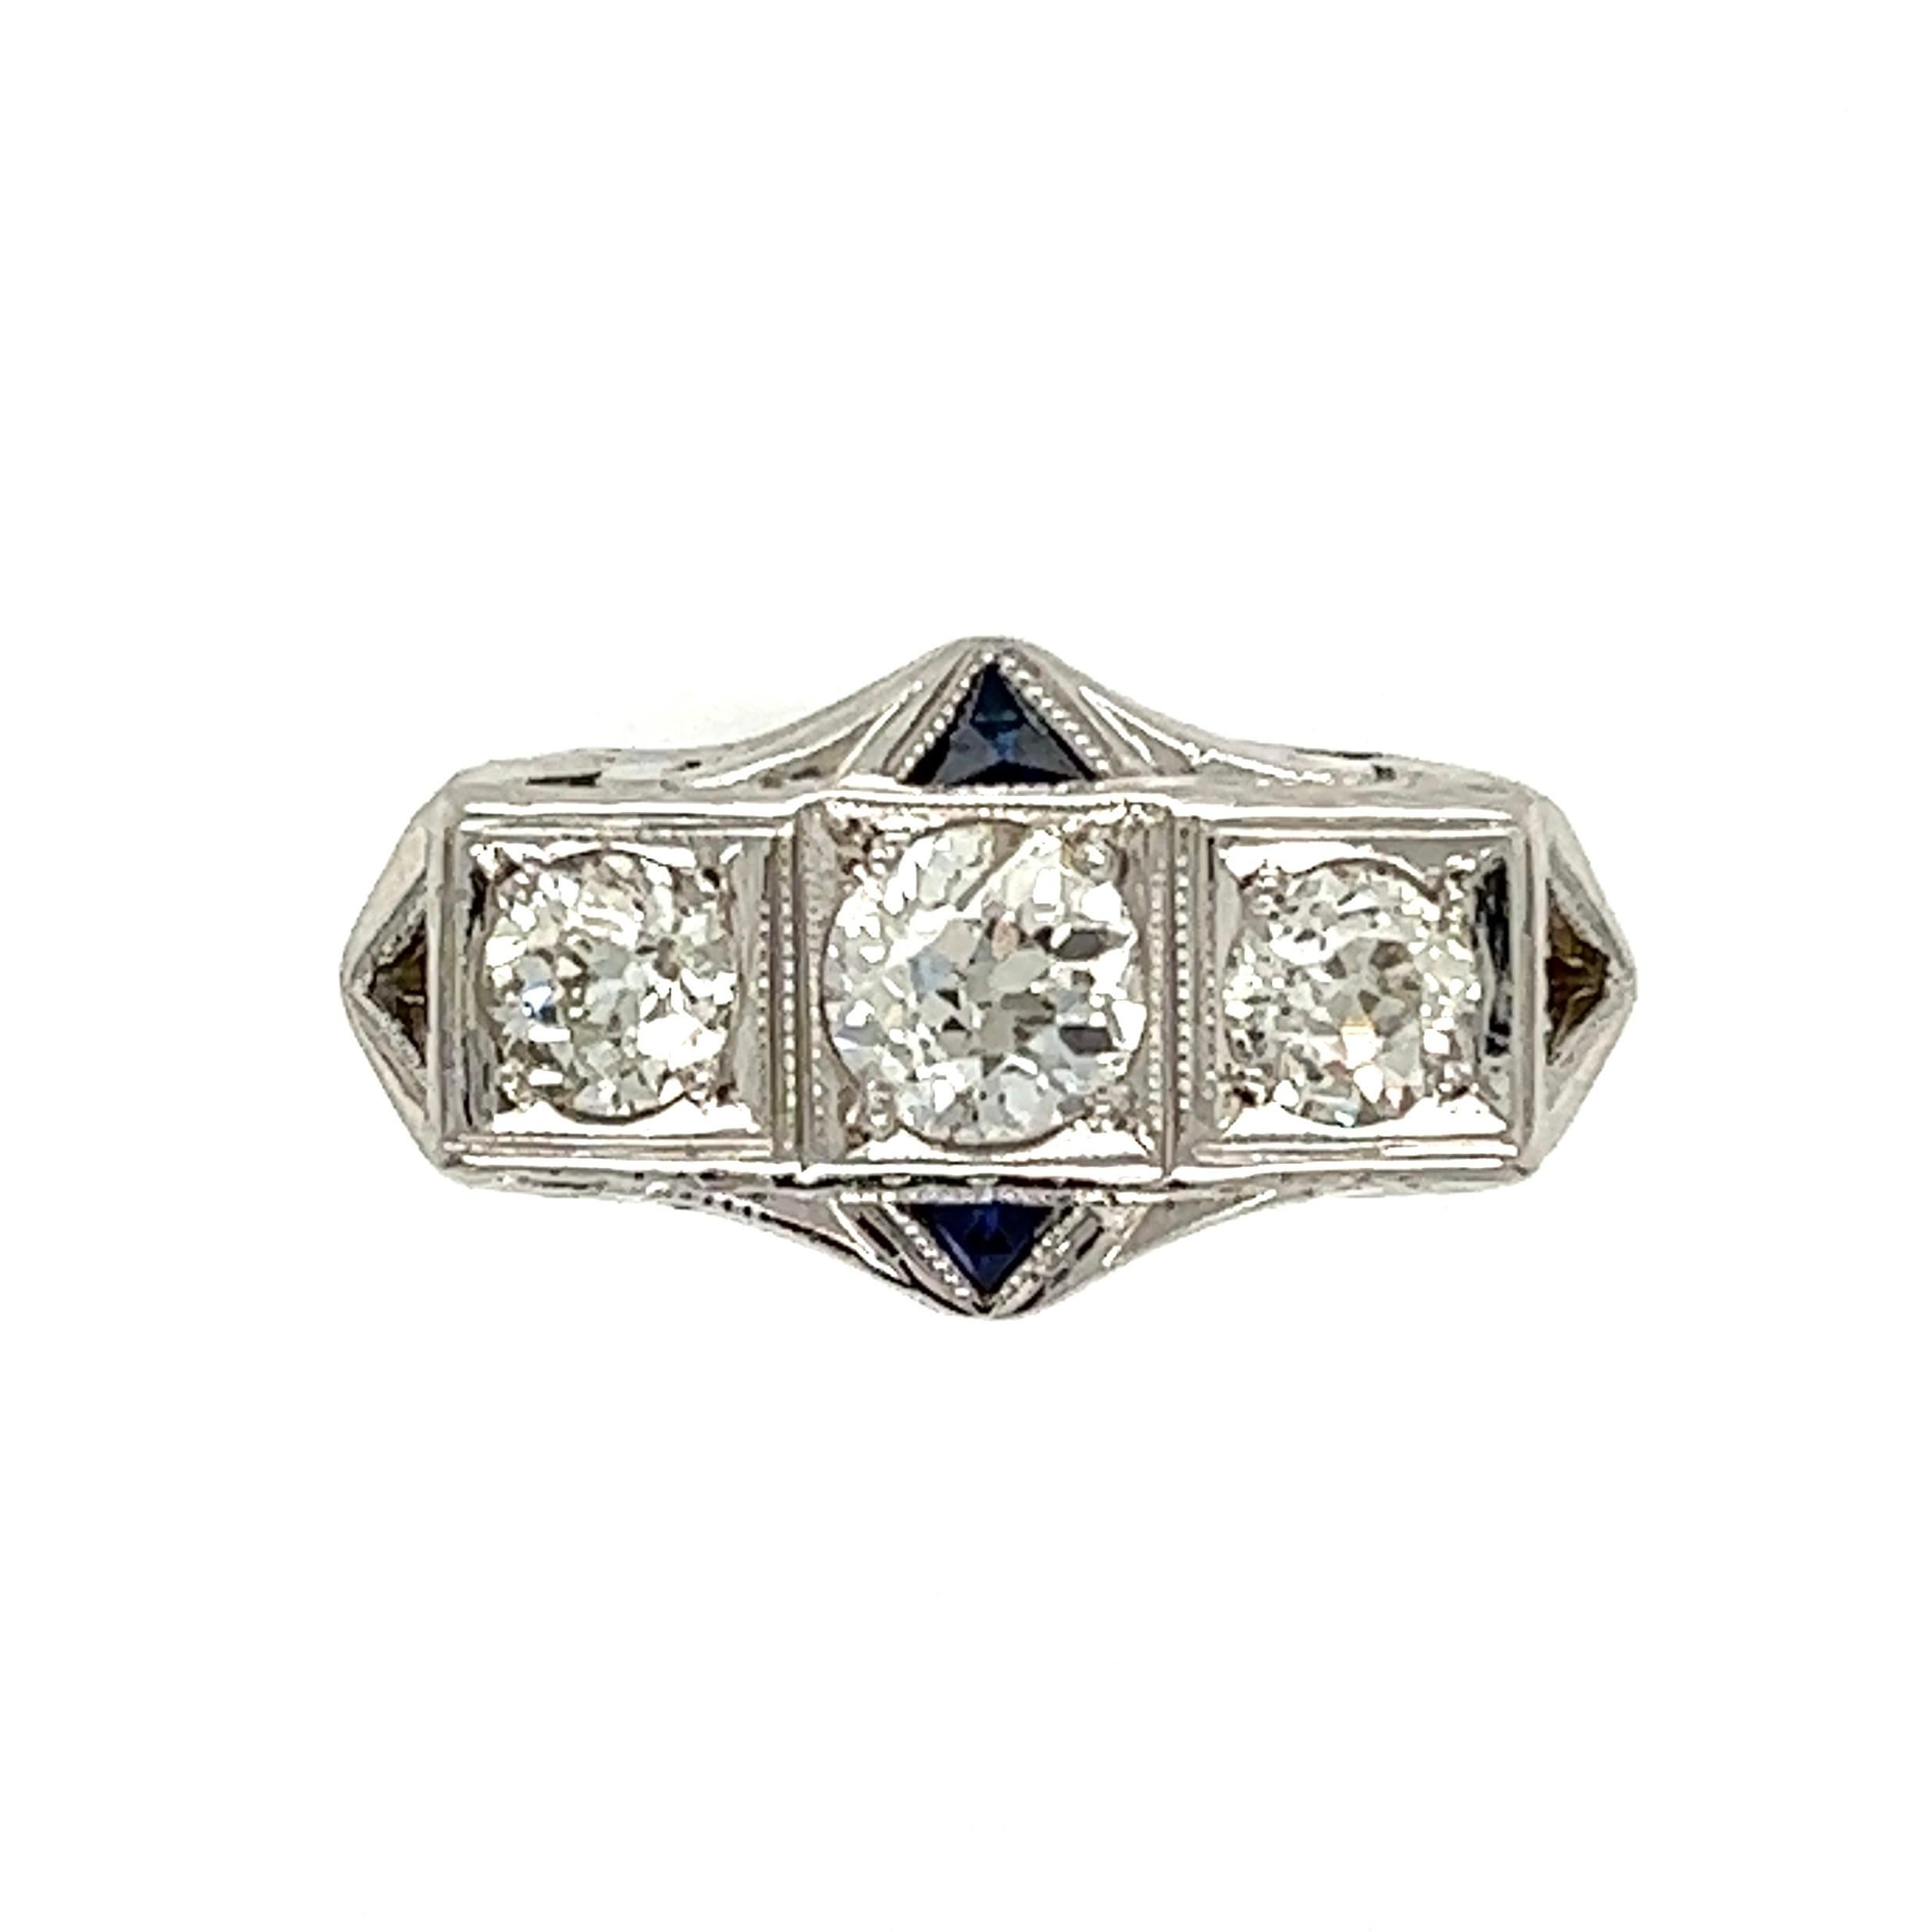 3-Stone Diamond Art Deco Revival Gold Ring  In Excellent Condition For Sale In Montreal, QC